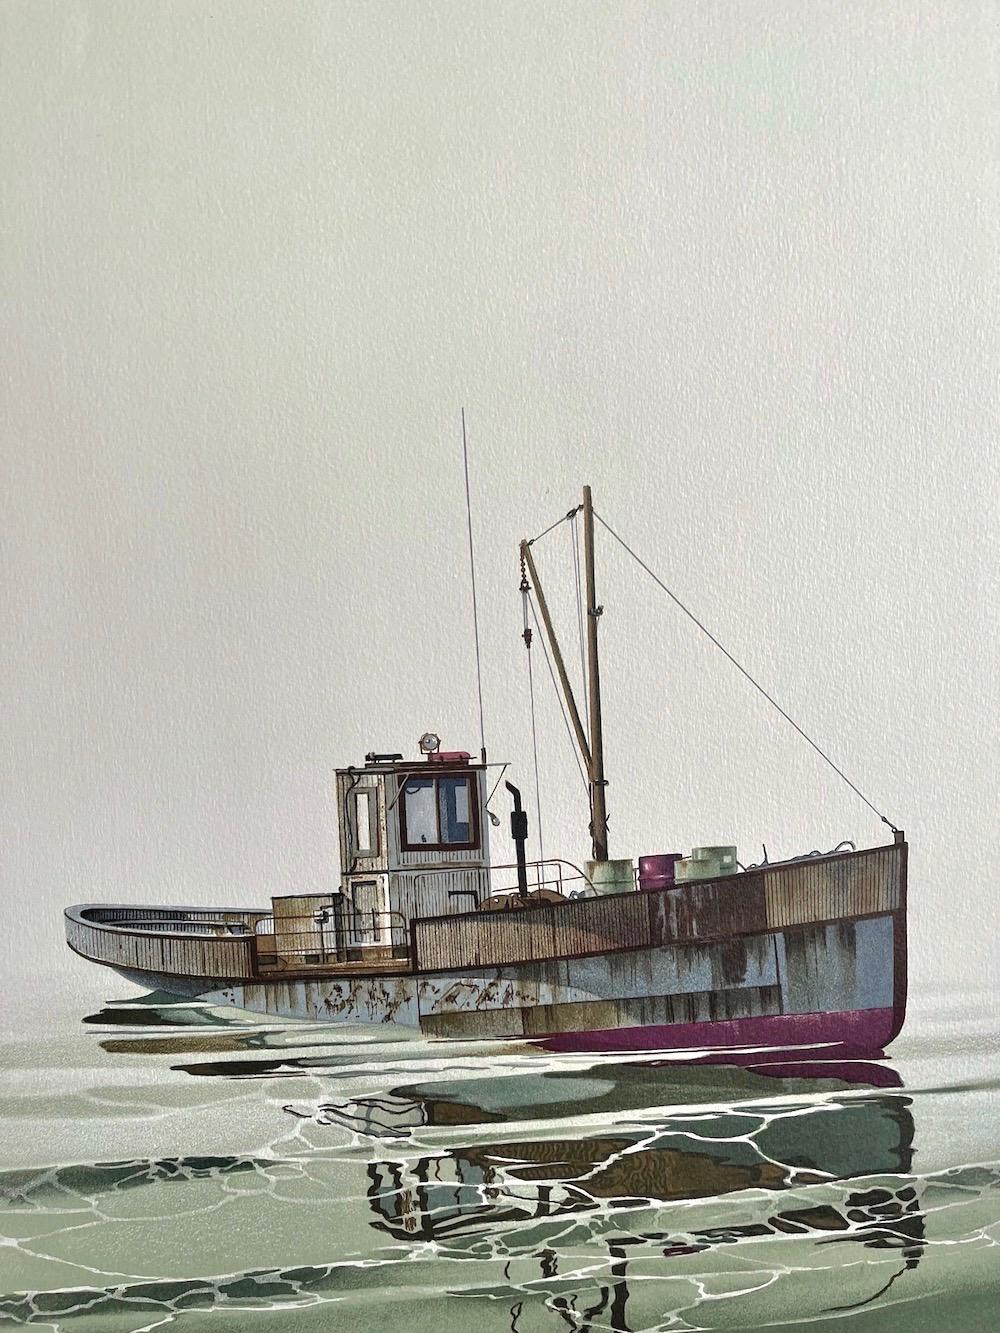 CAY RUNNER Signed Lithograph, Realistic Runner Boat on Calm Water, Marine Art - Print by John Lutes